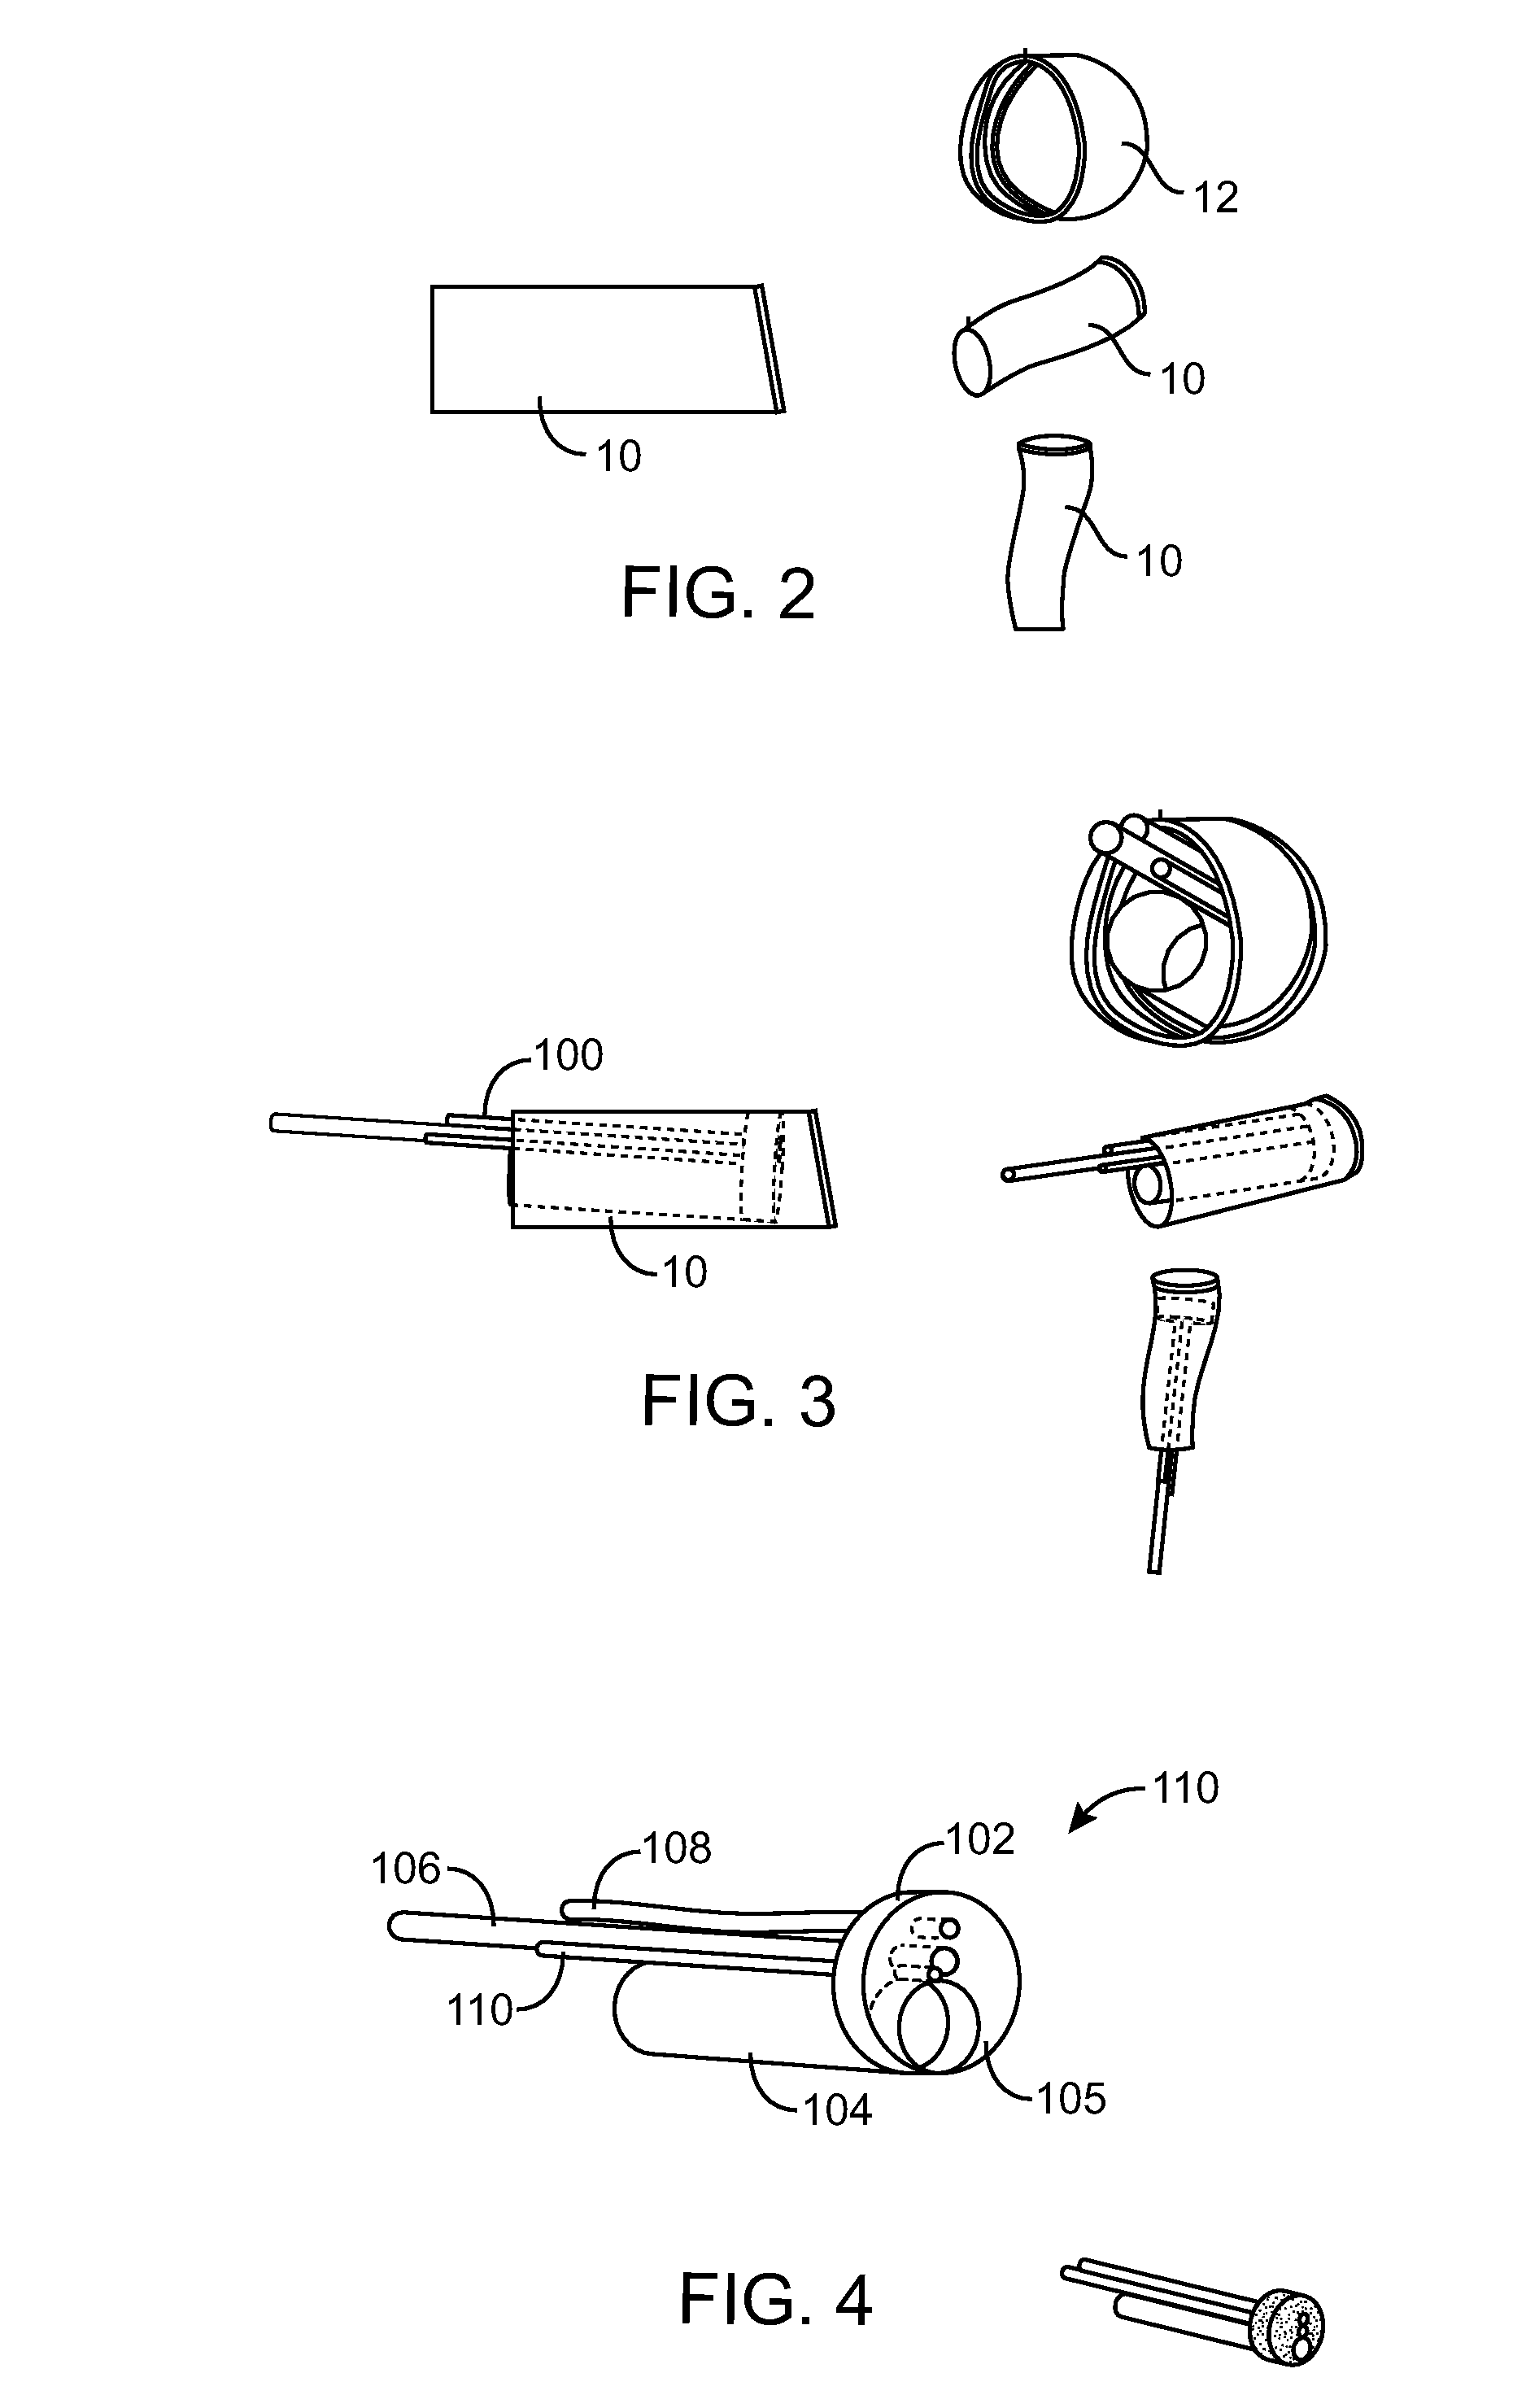 System and Method for the Simultaneous Automated Bilateral Delivery of Pressure Equalization Tubes